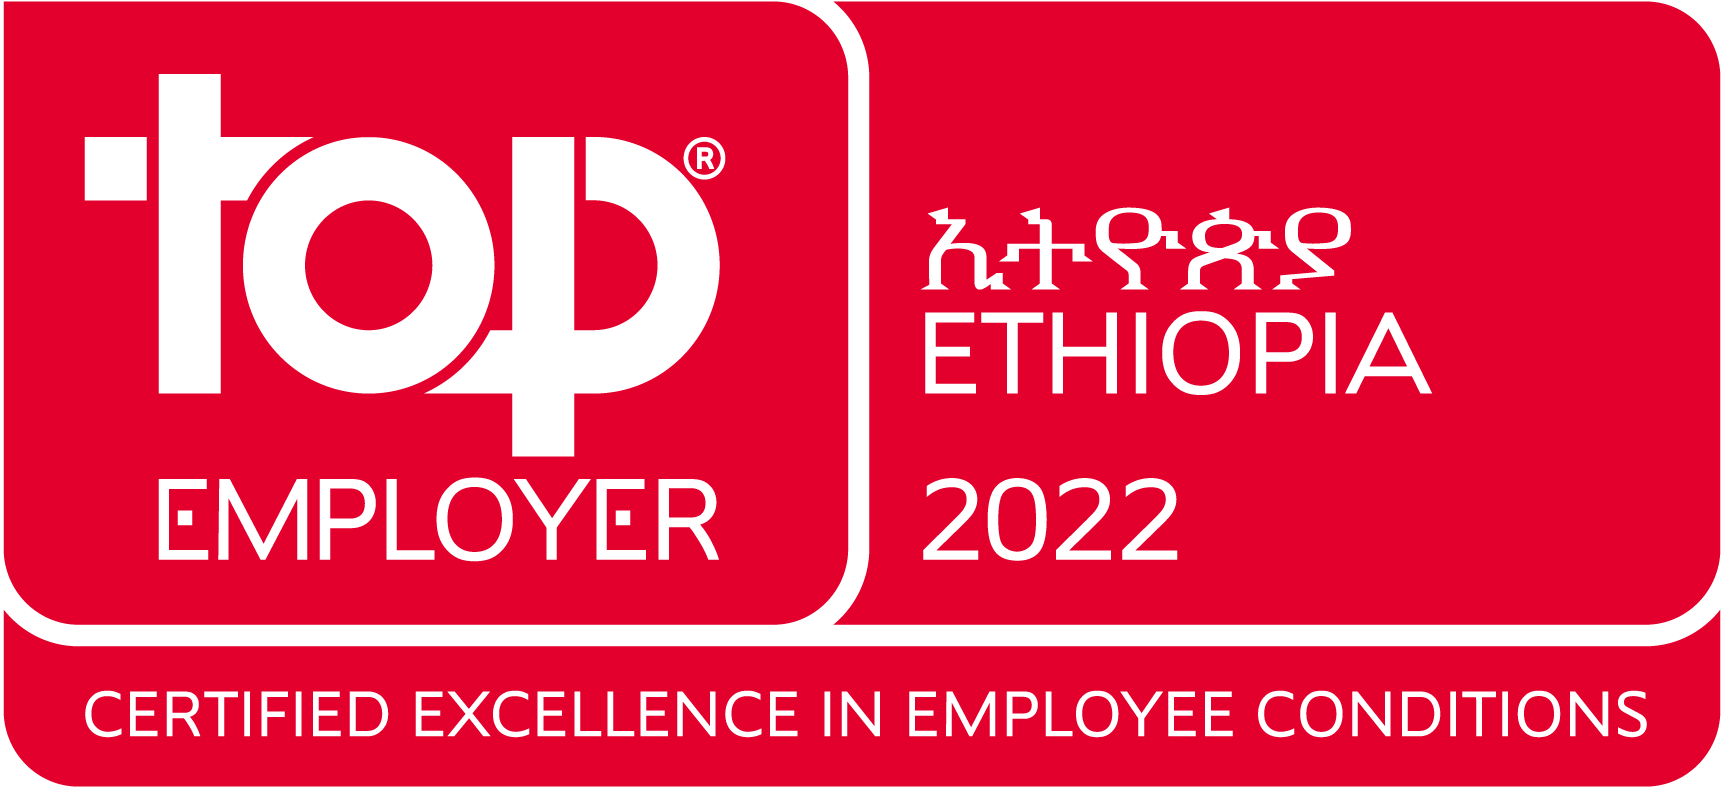 Huawei Ethiopia PLC is recognised as a Top Employer 2022 in Ethiopia.